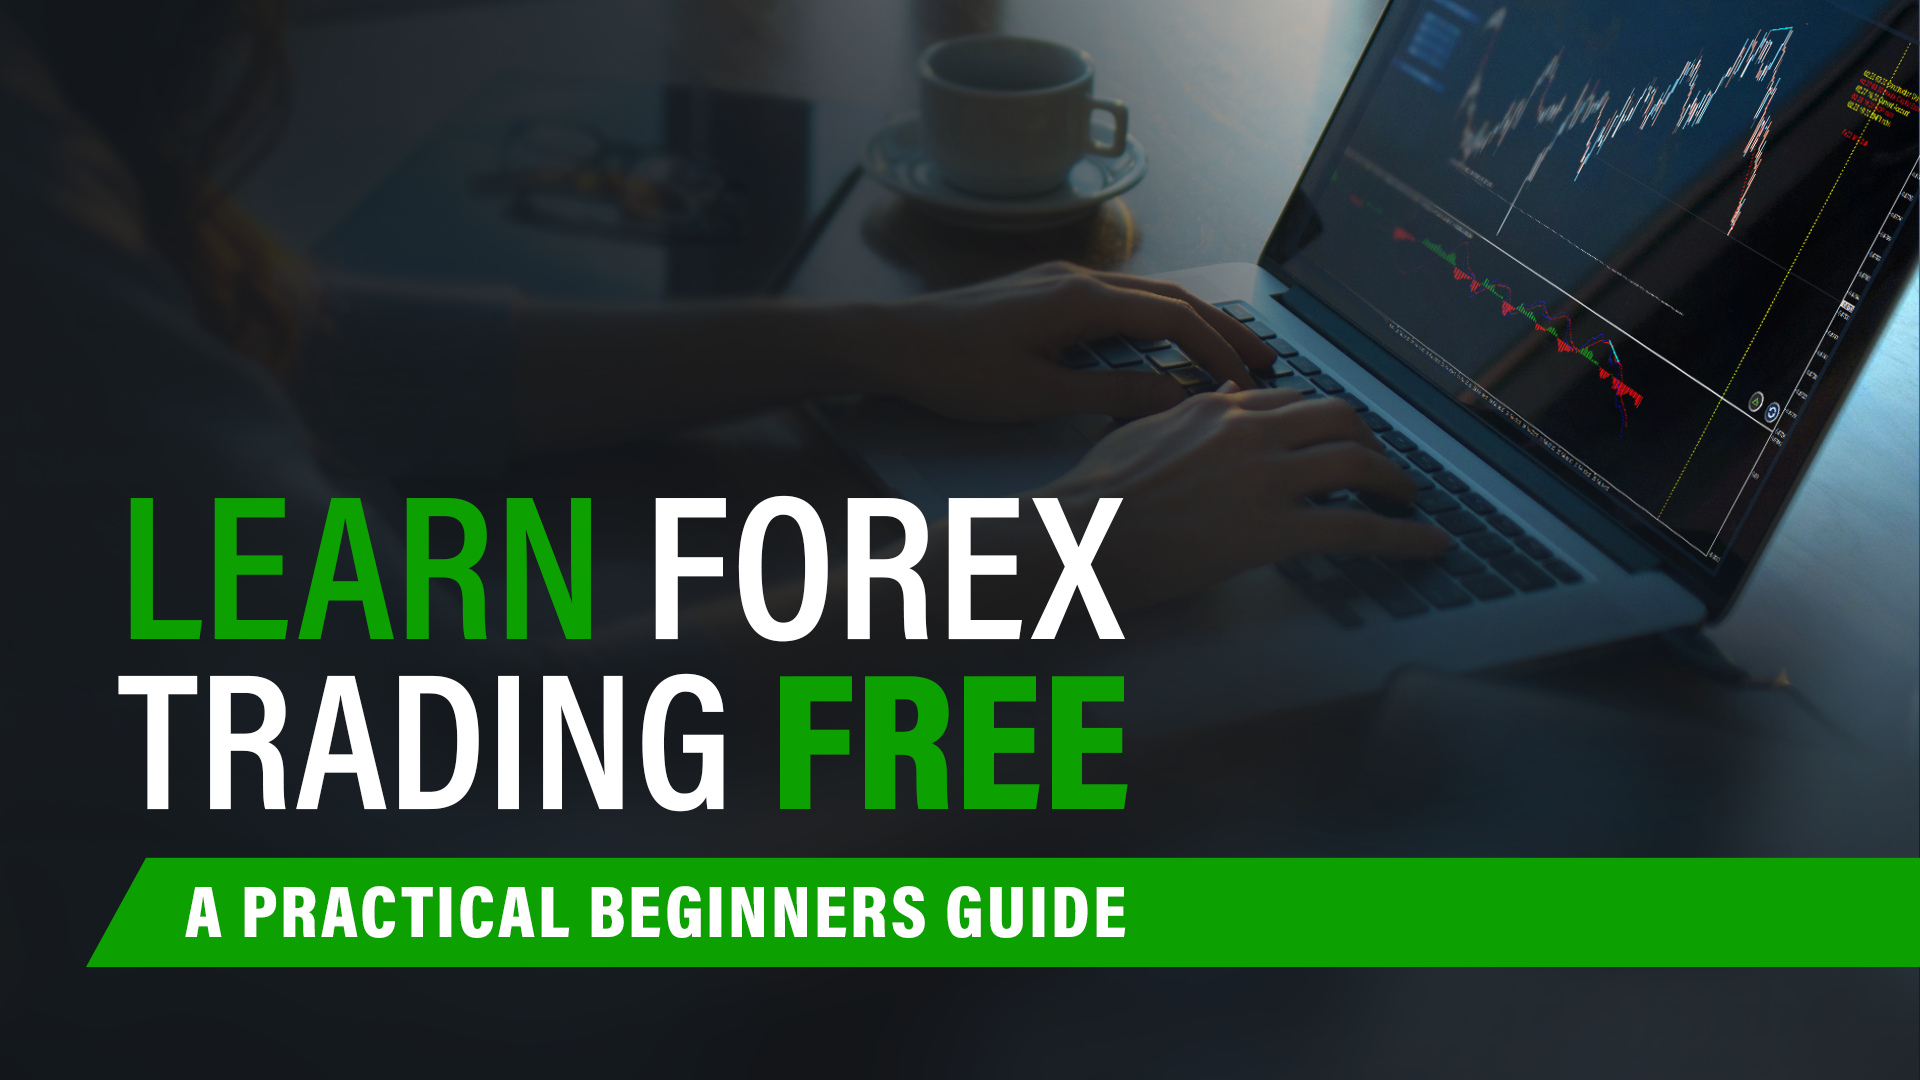 Forex tutorial free binary options for beginners books